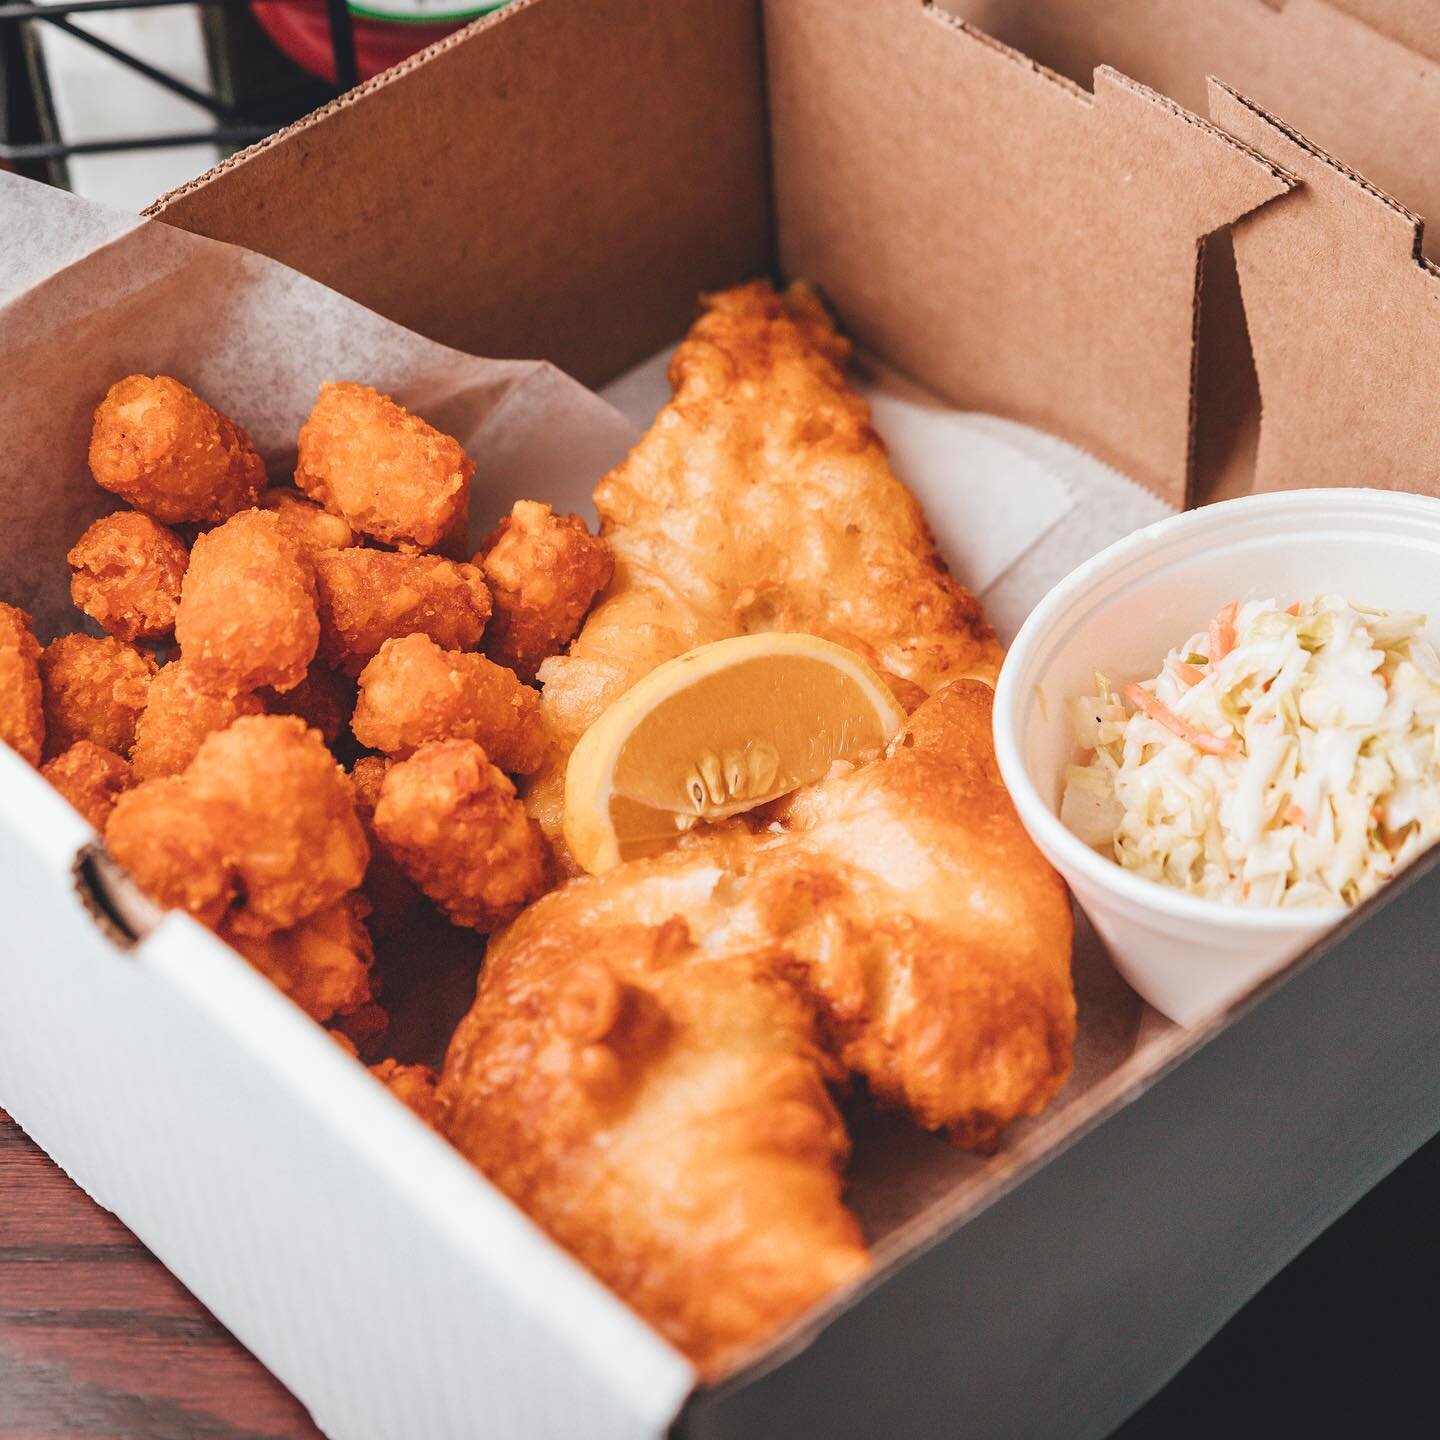 You already know what we&rsquo;re up to today 😏 Get your Fish Fry in-house or to-go! Either way, they&rsquo;ll be selling FAST so don&rsquo;t wait! 🤘🏼🐢